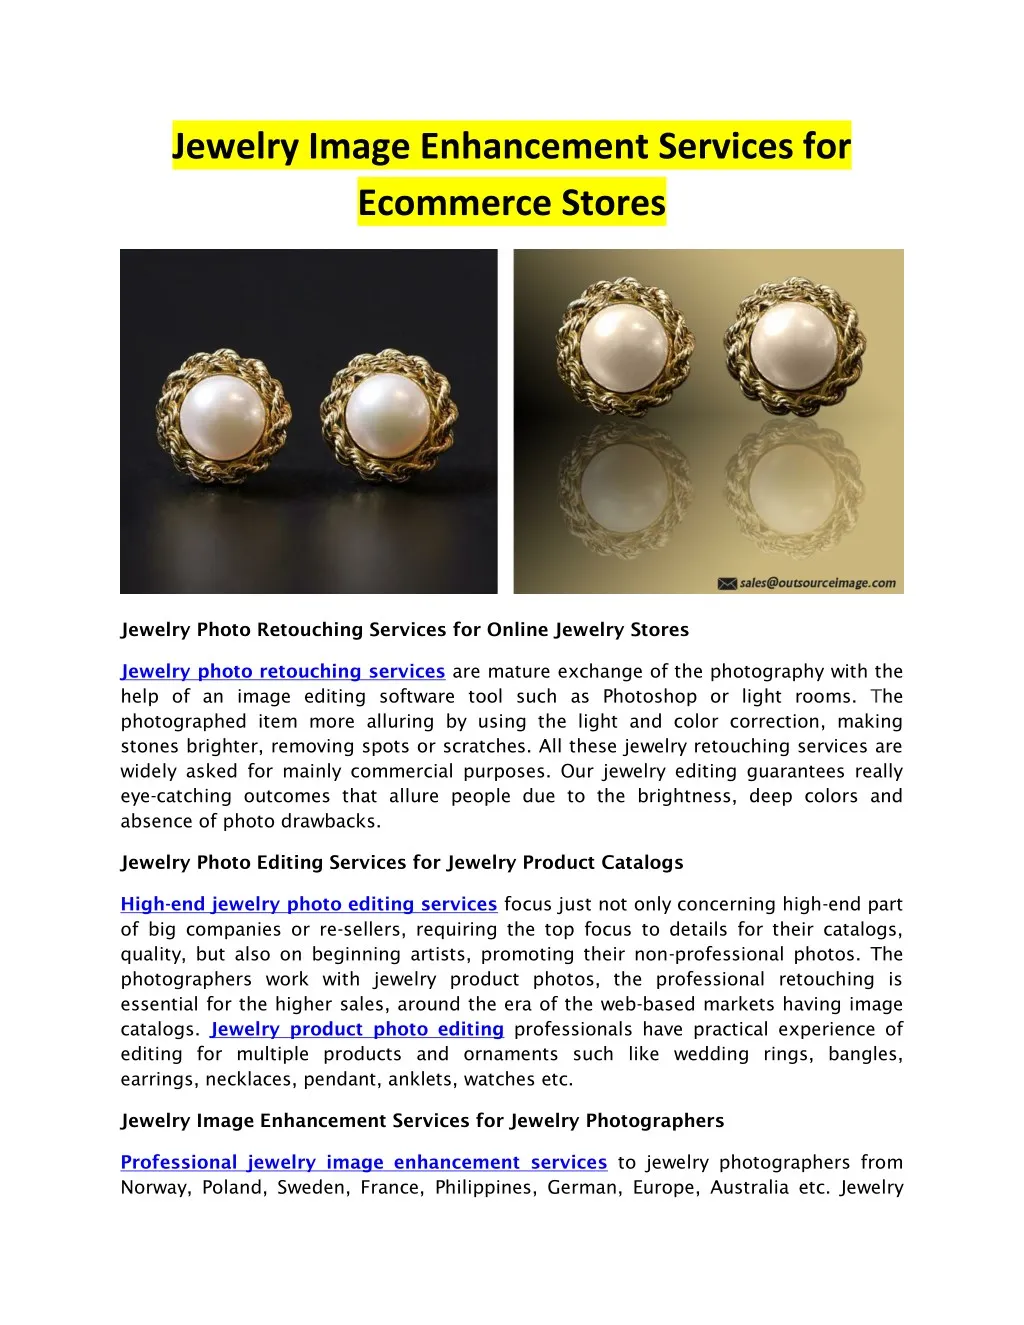 jewelry image enhancement services for ecommerce